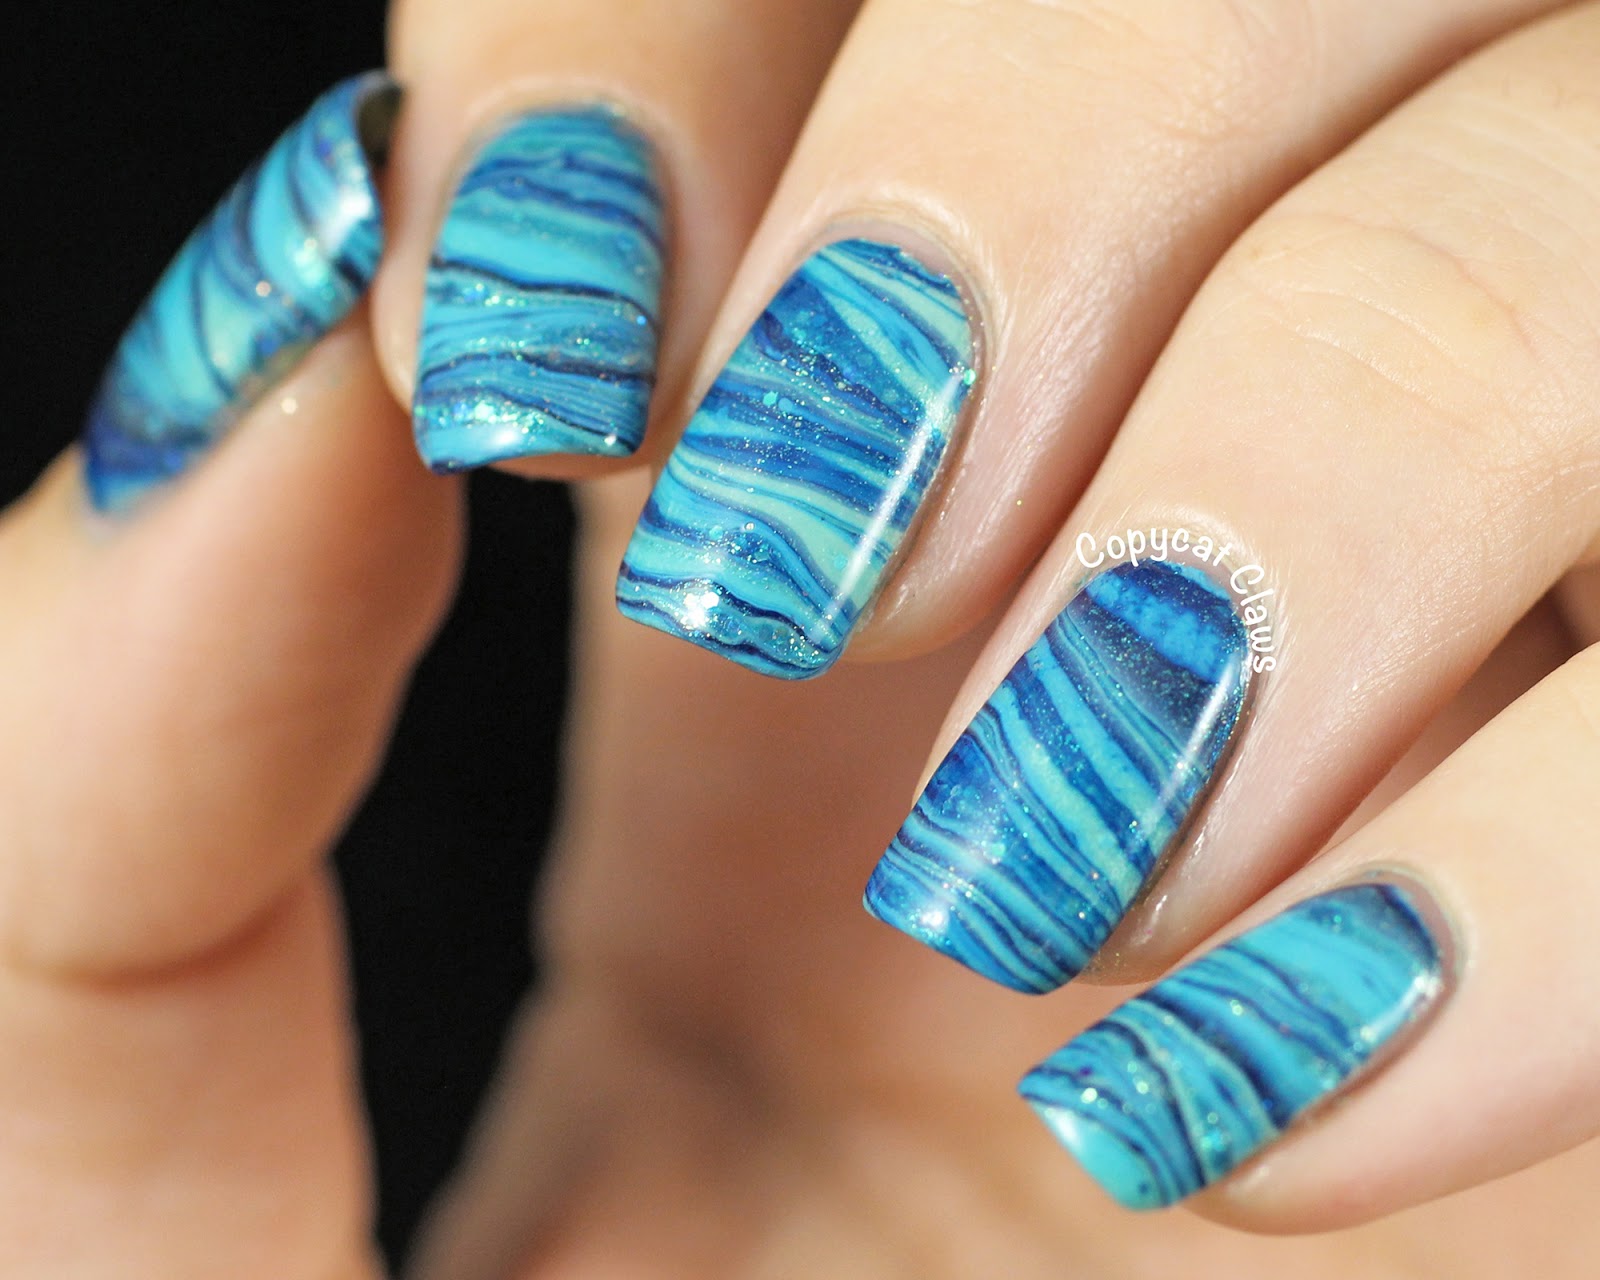 7. Blue Marble Nails - wide 1